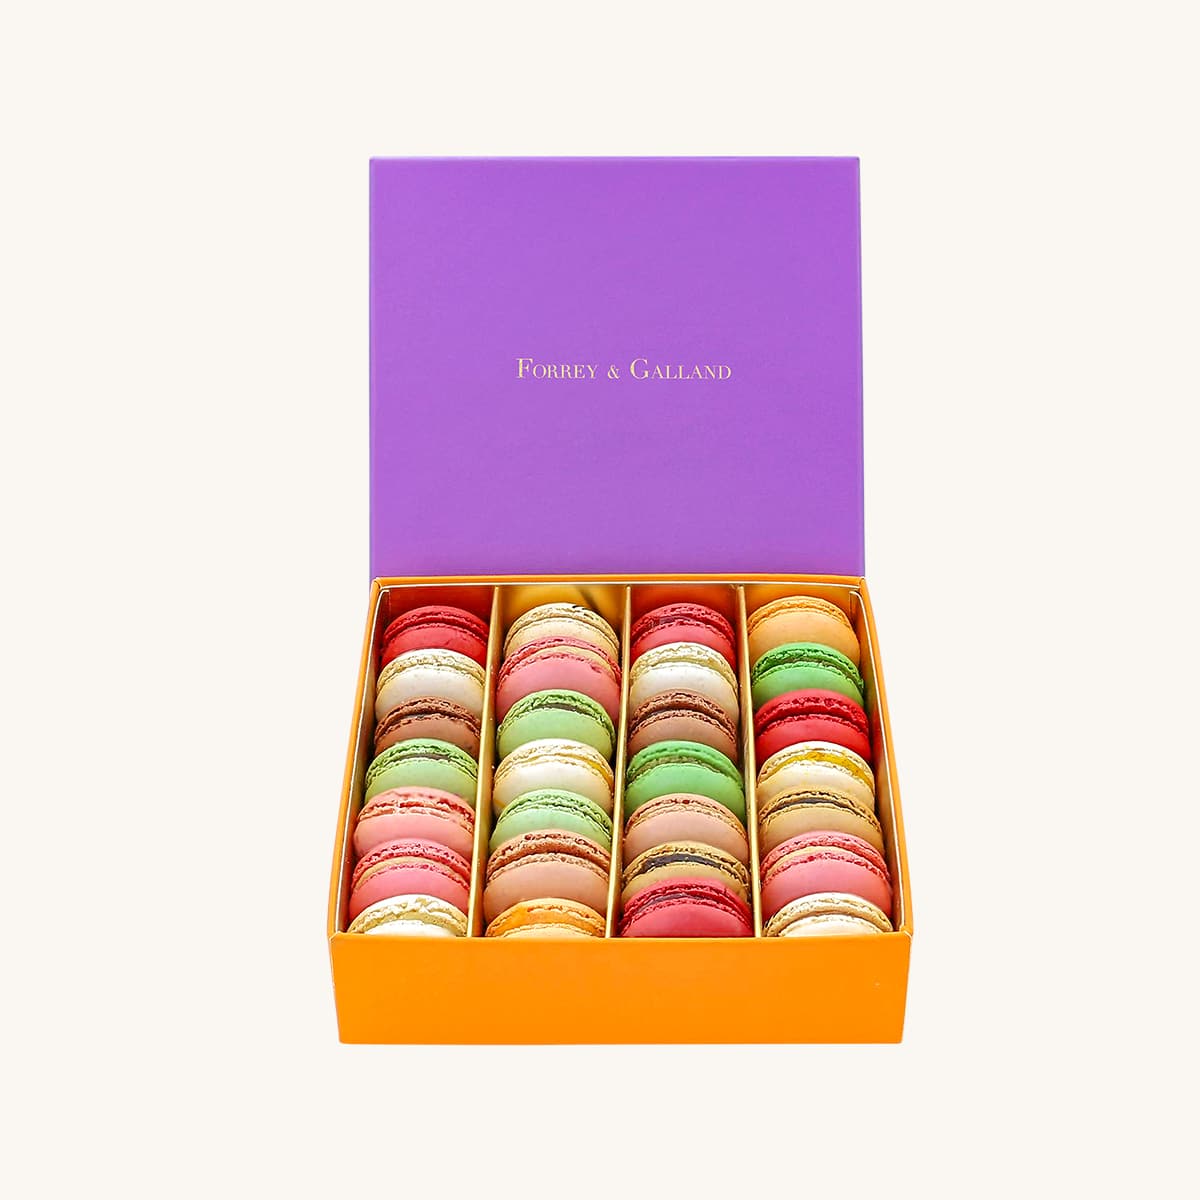 Forrey & Galland elegant gift box filled with 24 pieces of handmade premium macarons